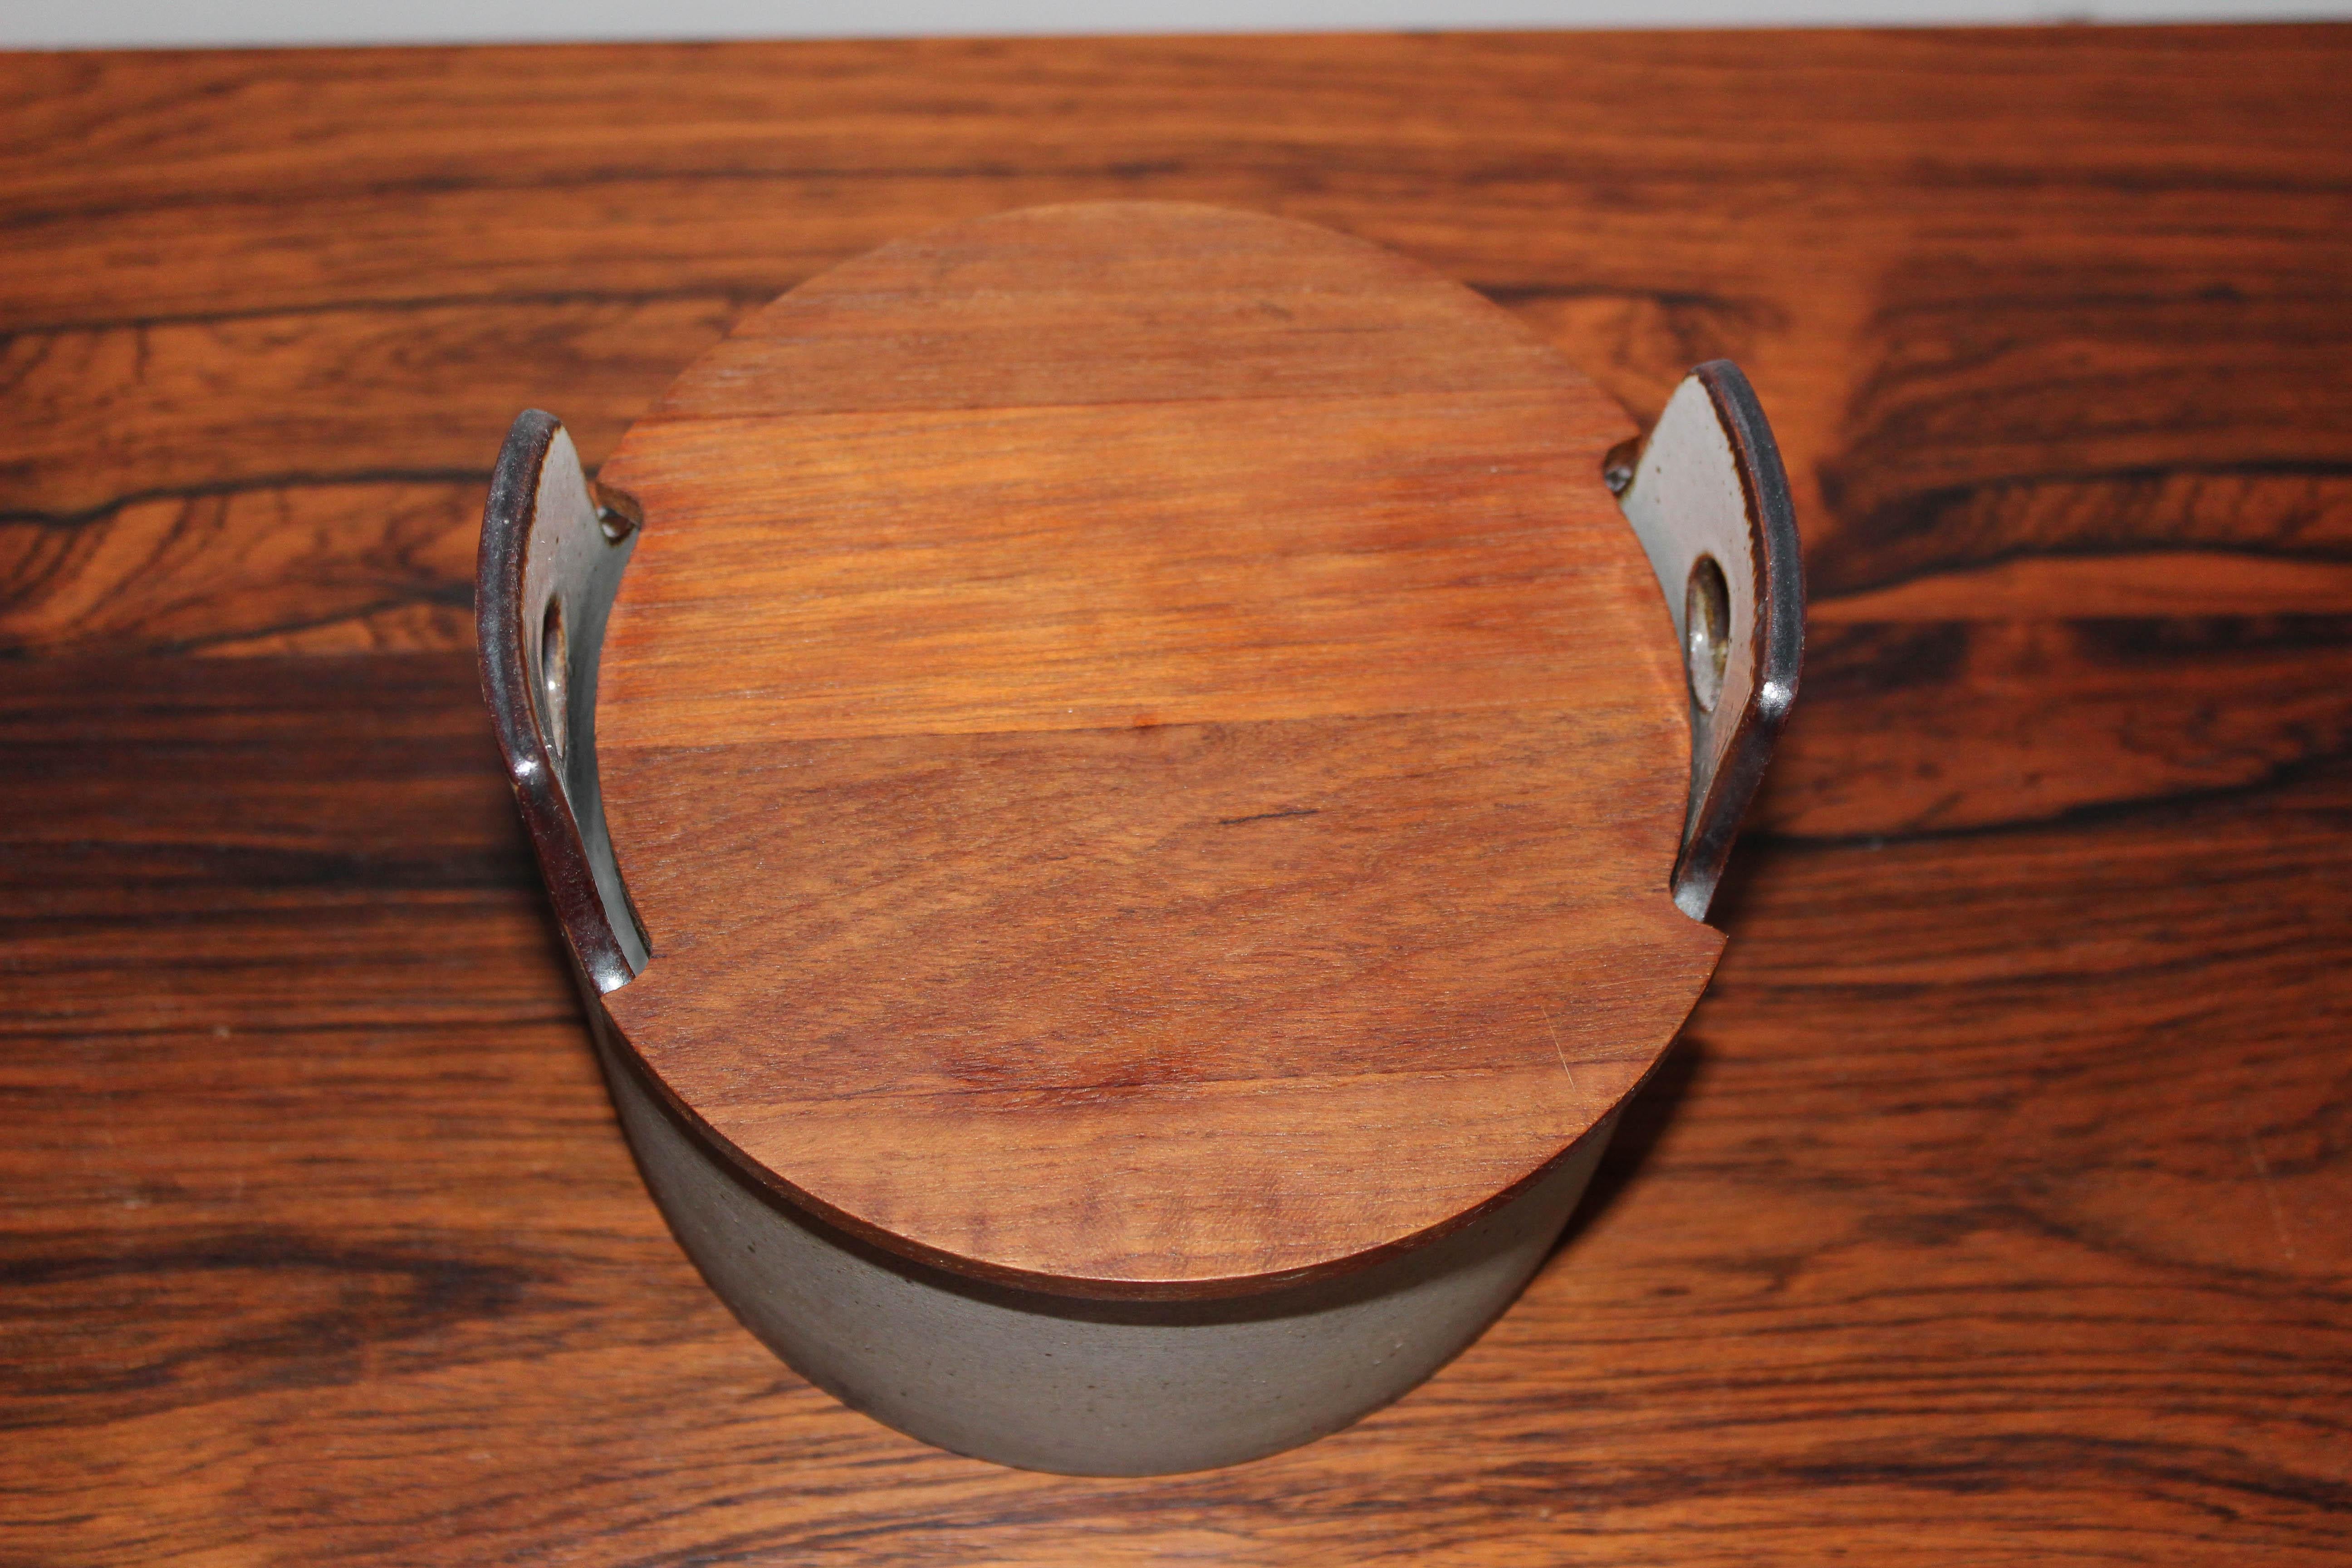 Mid-20th Century Midcentury Danish Ceramic Bowl with Teak Lid by Knabstrup Atelier For Sale